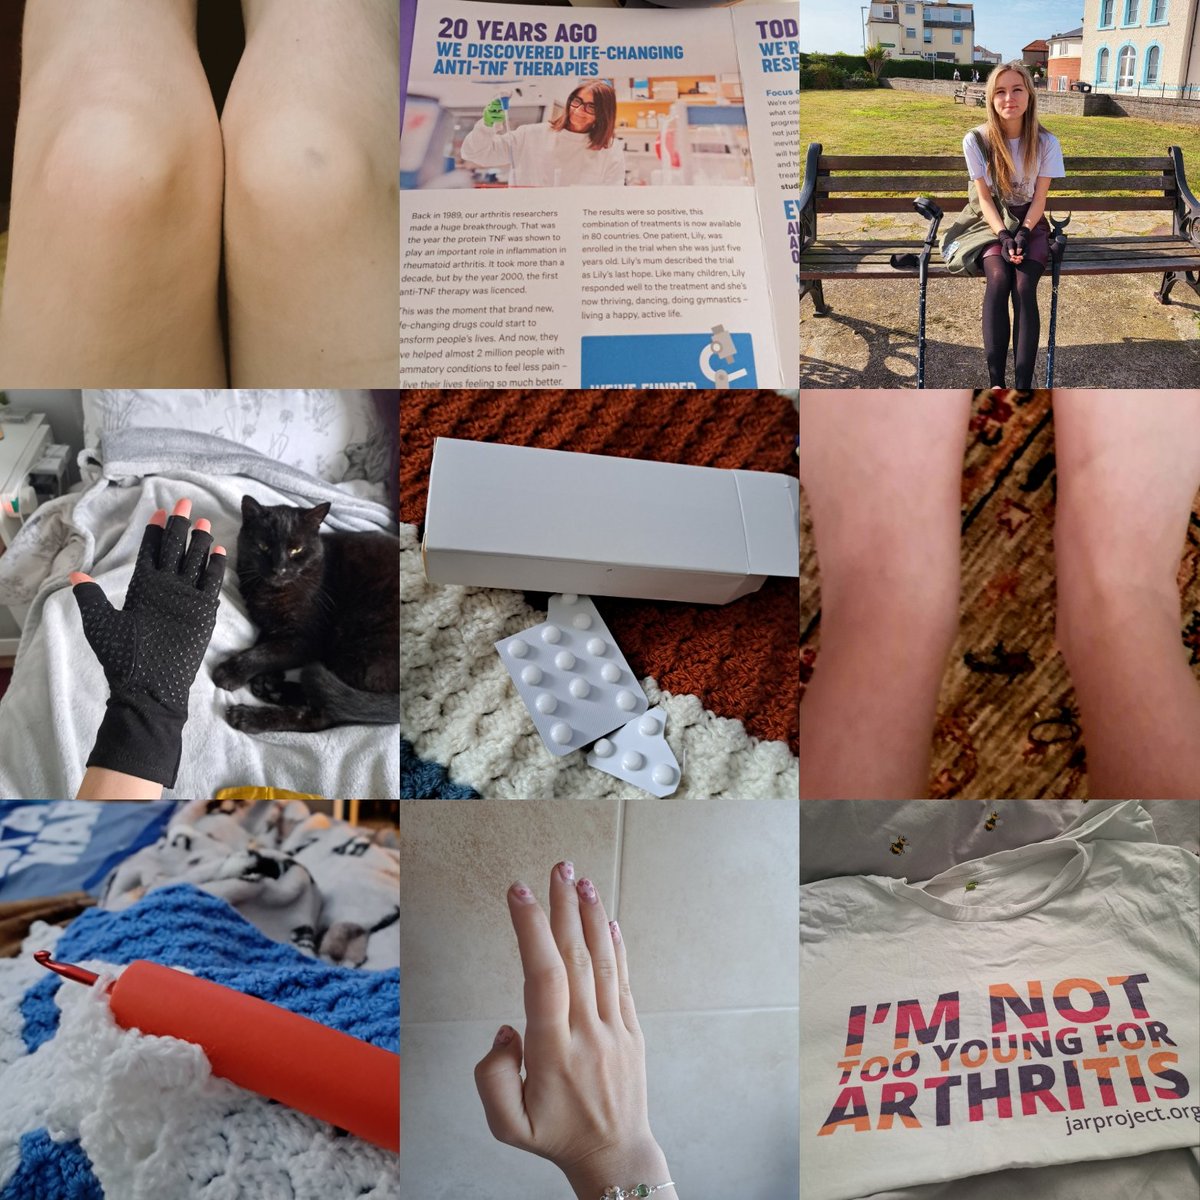 This #WorldArthritisDay I'm reflecting on my journey with #JIA and the debilitating impact it's had on my life. Arthritis is more than just painful joints. It impacts every aspect of a person's life. It's also shaped me into the resilient & determined person I am today